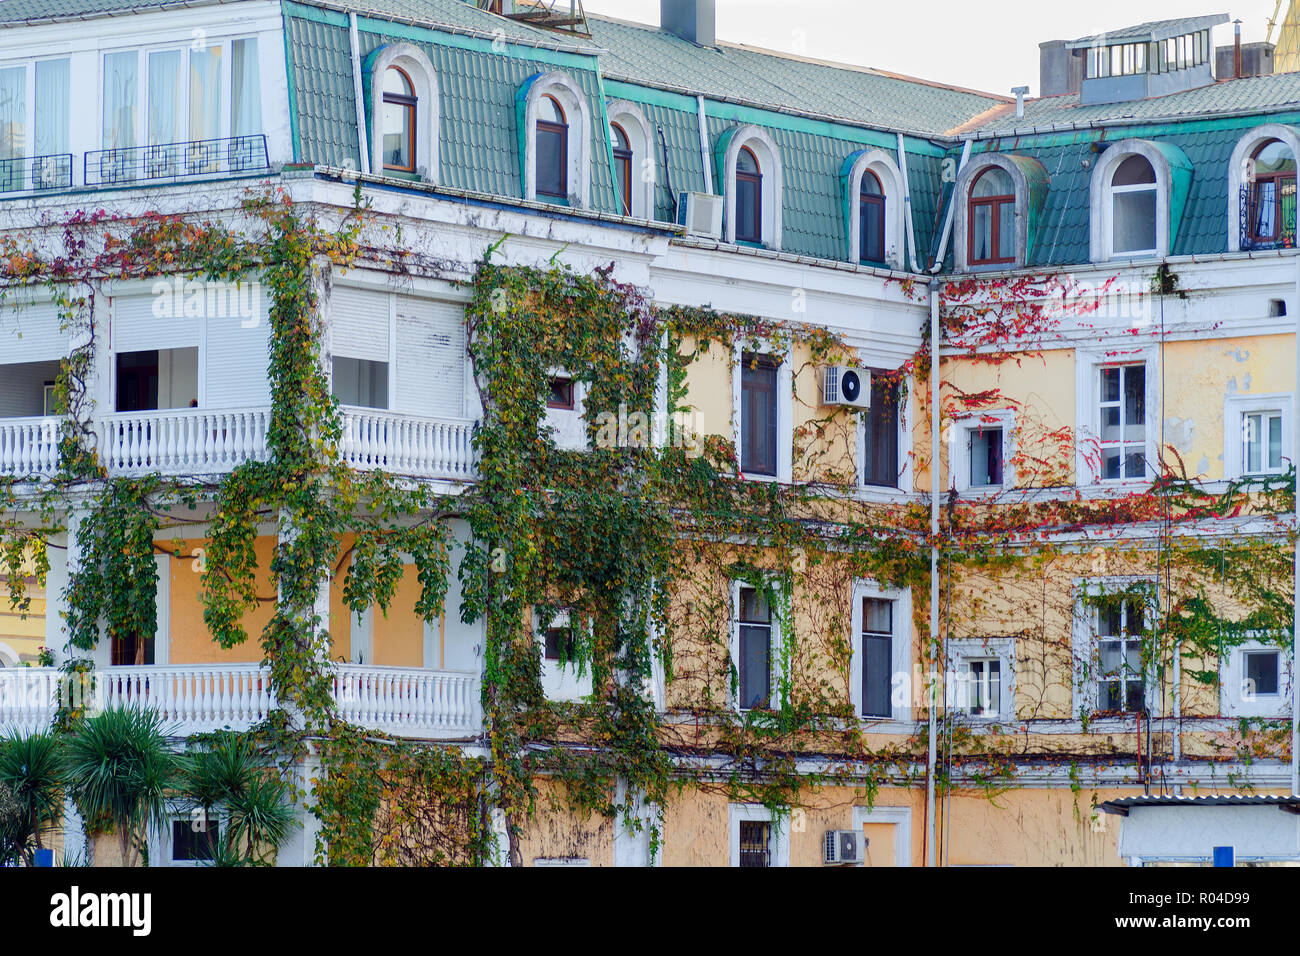 Batumi, Georgia, 2017-11-04: General architecture - facade of traditional residential building, covered with ivy and grape varnish. Stock Photo